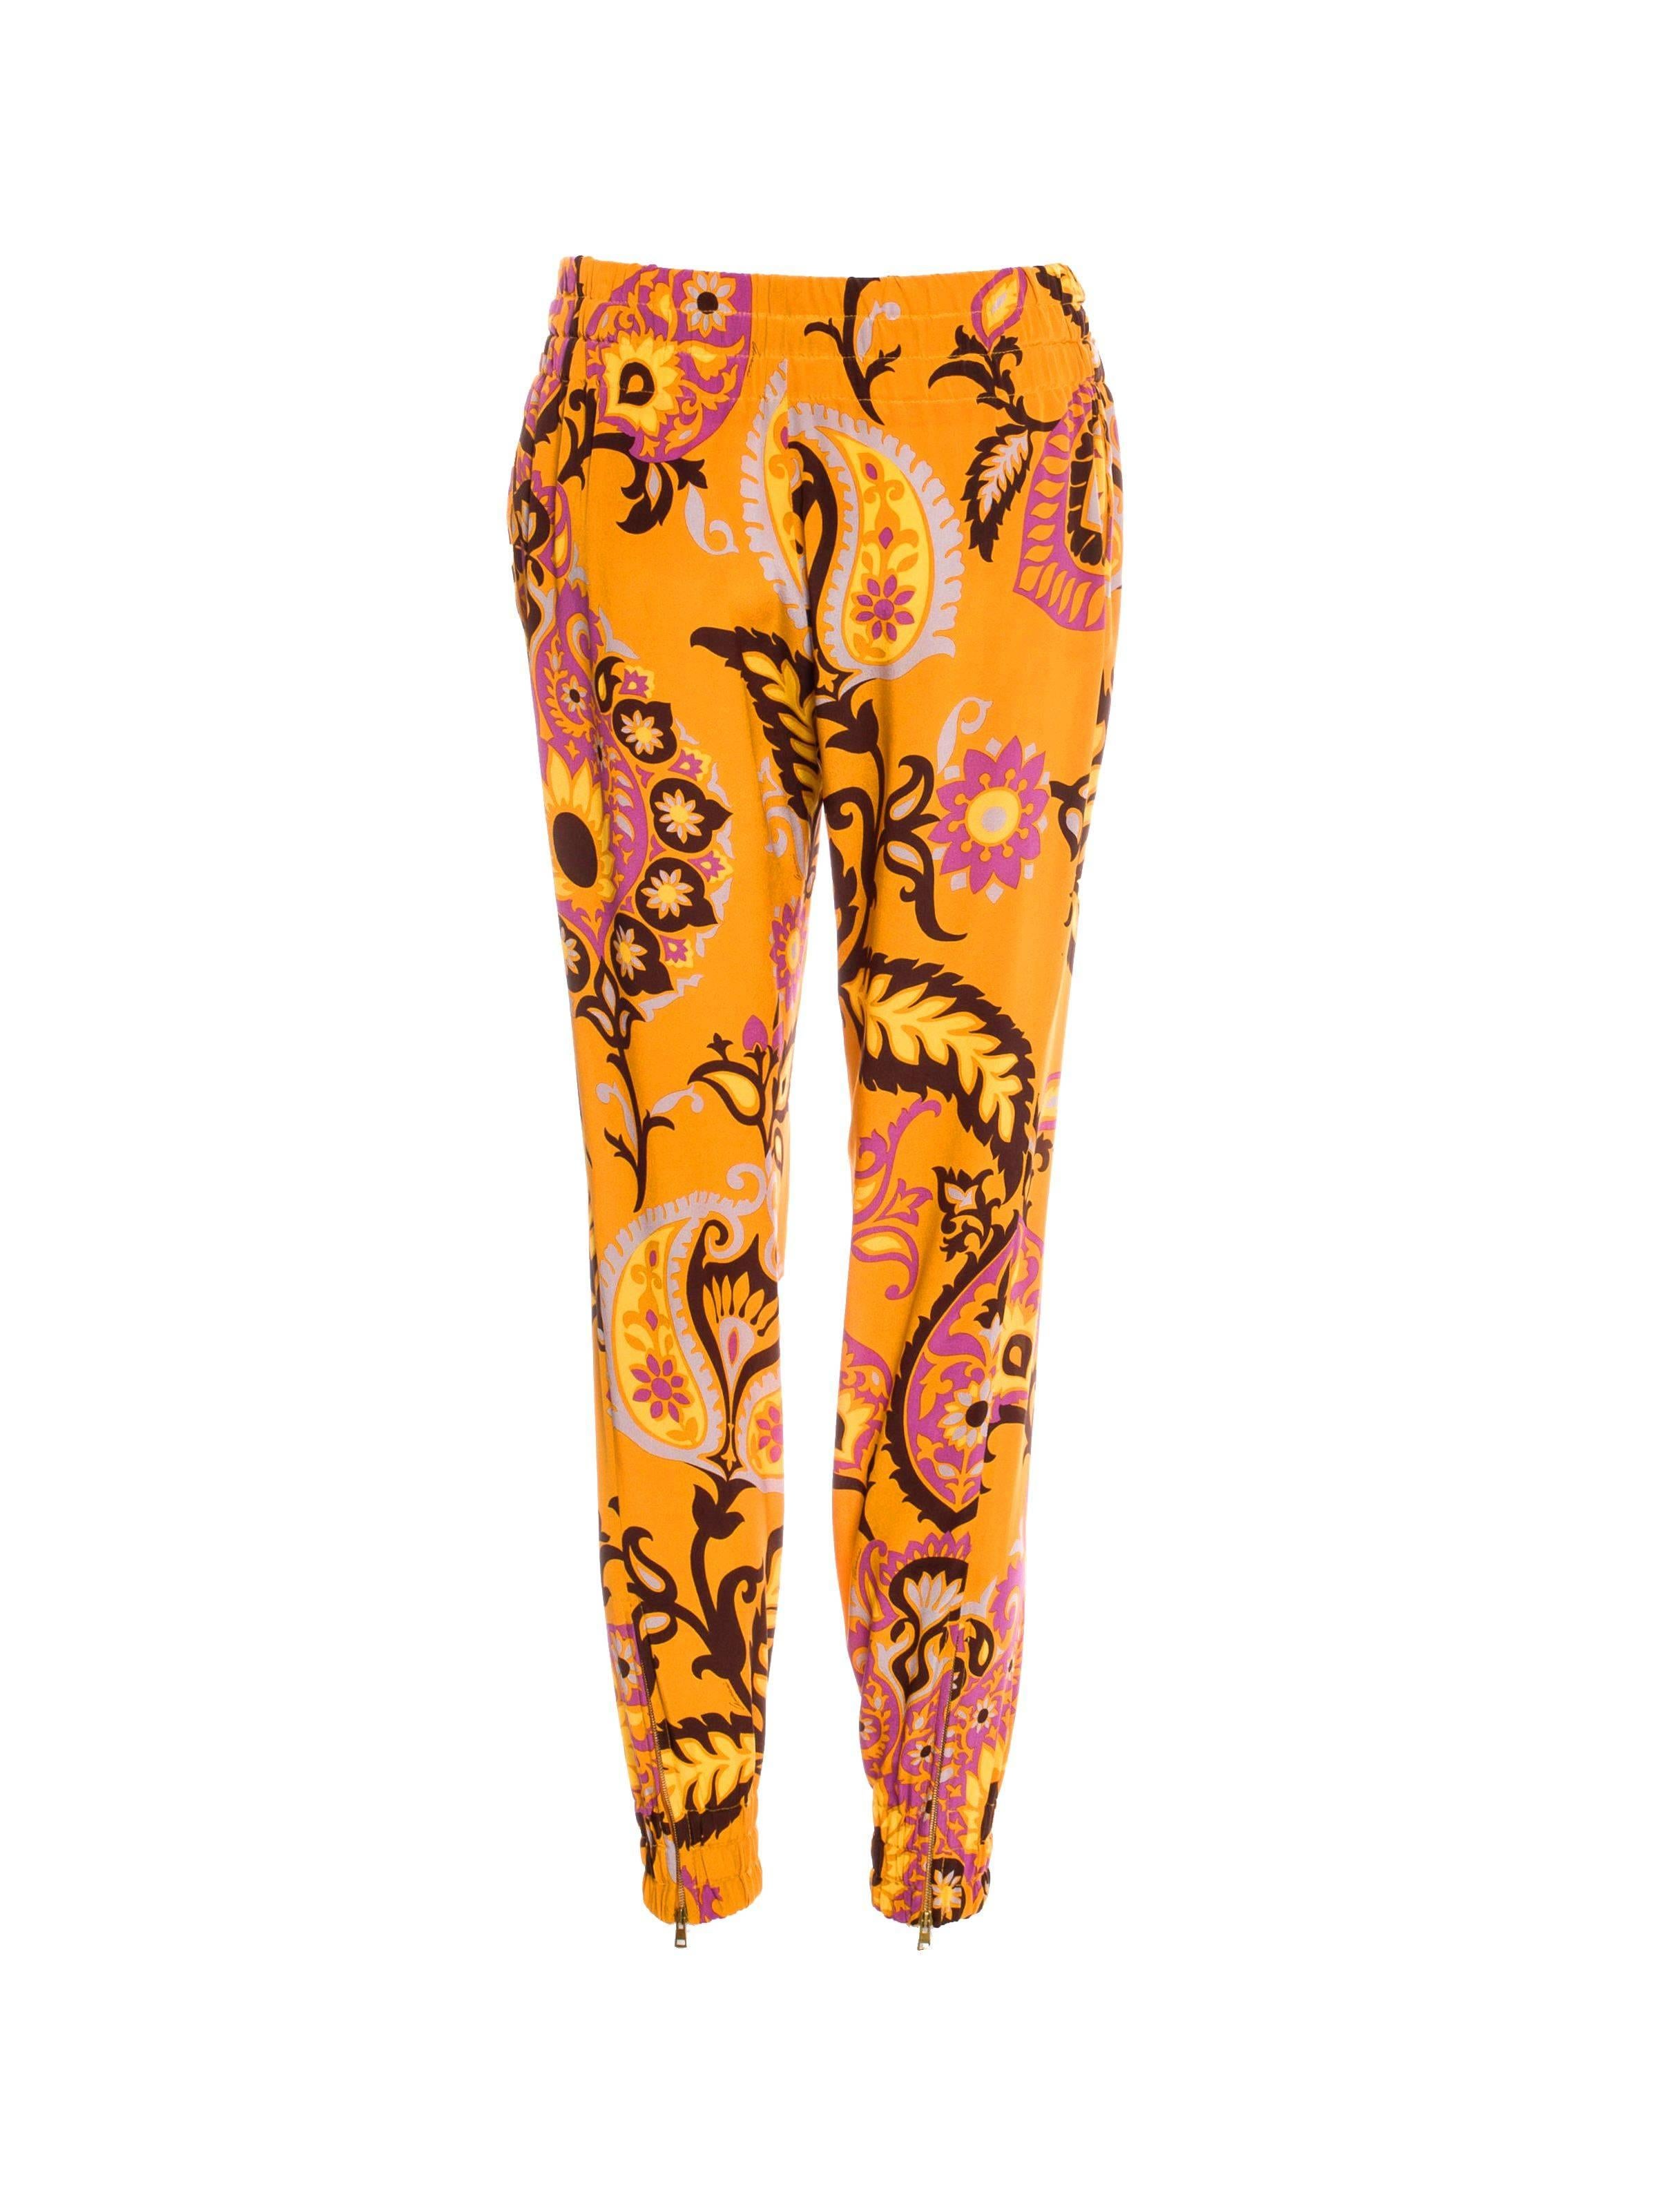 Printed silk pants by Gucci
Finest printed silk with paisley pattern
    Elastic waistband with drawstring
    Elastic leg openings with zip detail discreetly engraved with 